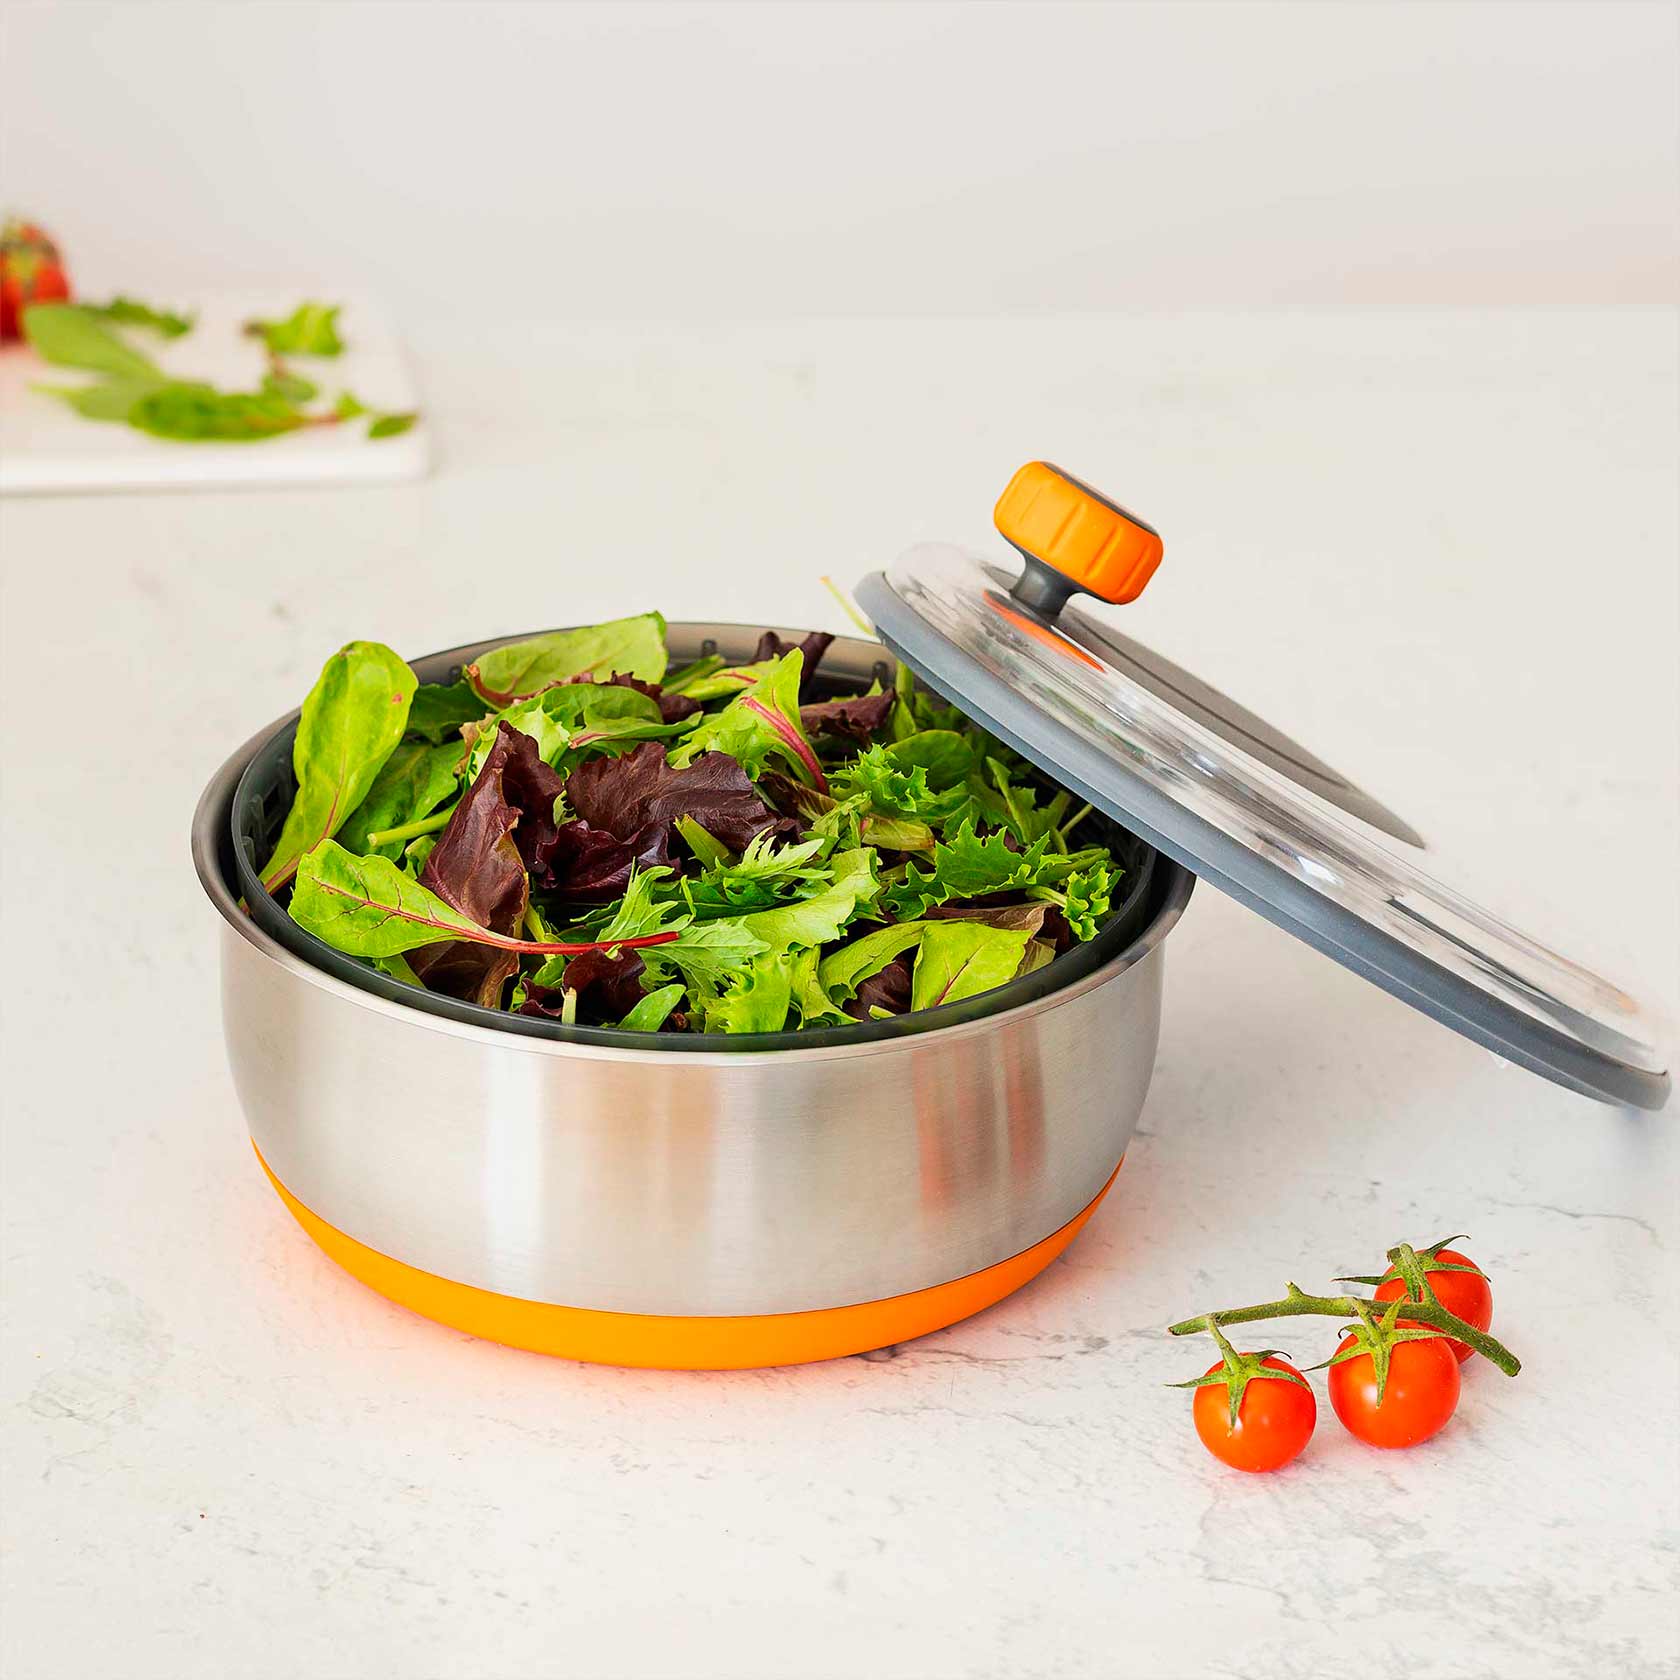 Stainless Steel Salad Spinner Efficientlys Wash and Spin Dry